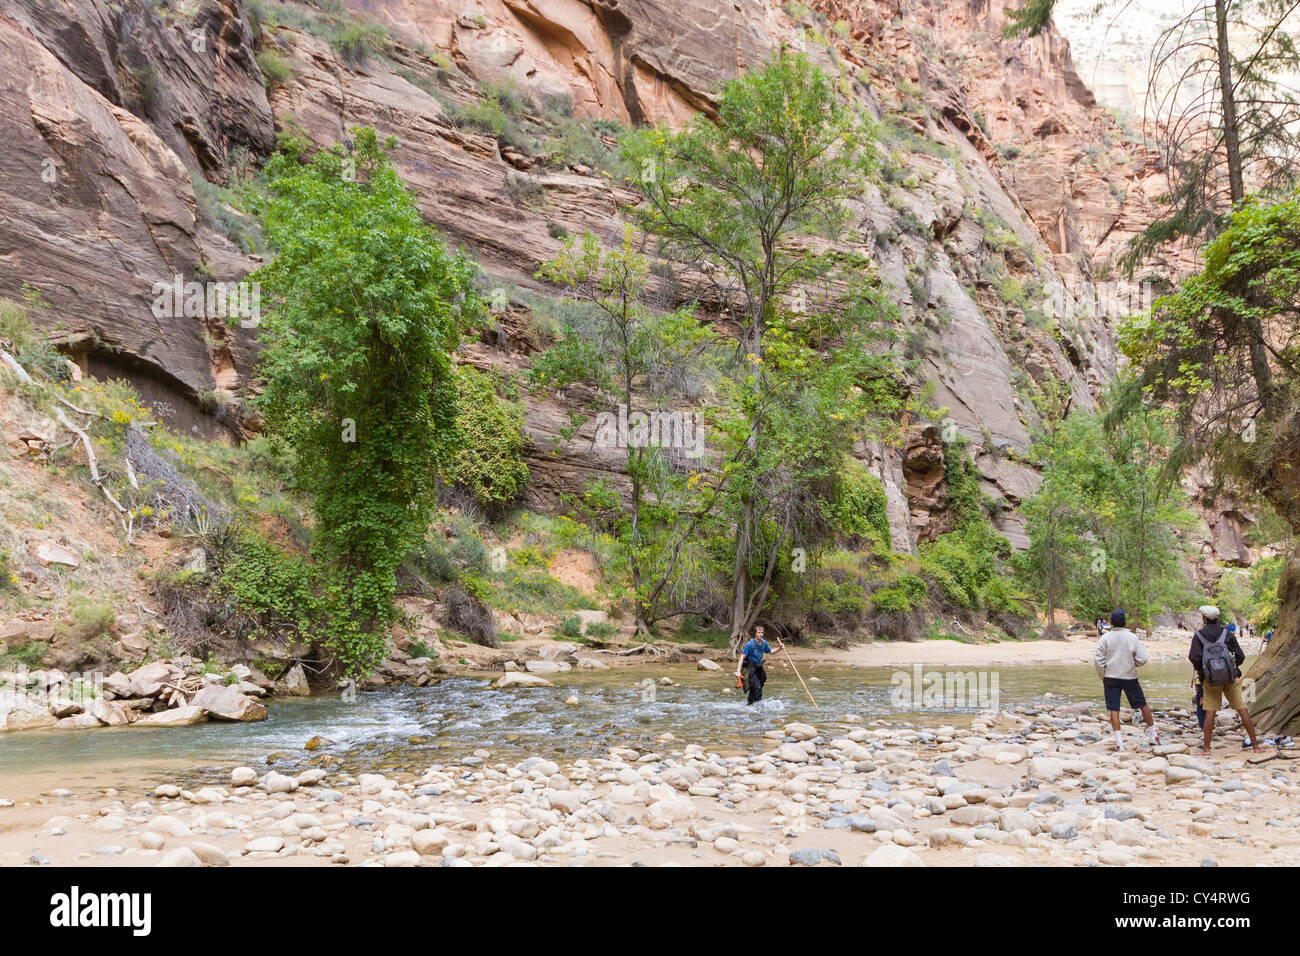 Man holding a hiking pole / stick crossing a Virgin River at Narrows in Zion National Park Stock Photo